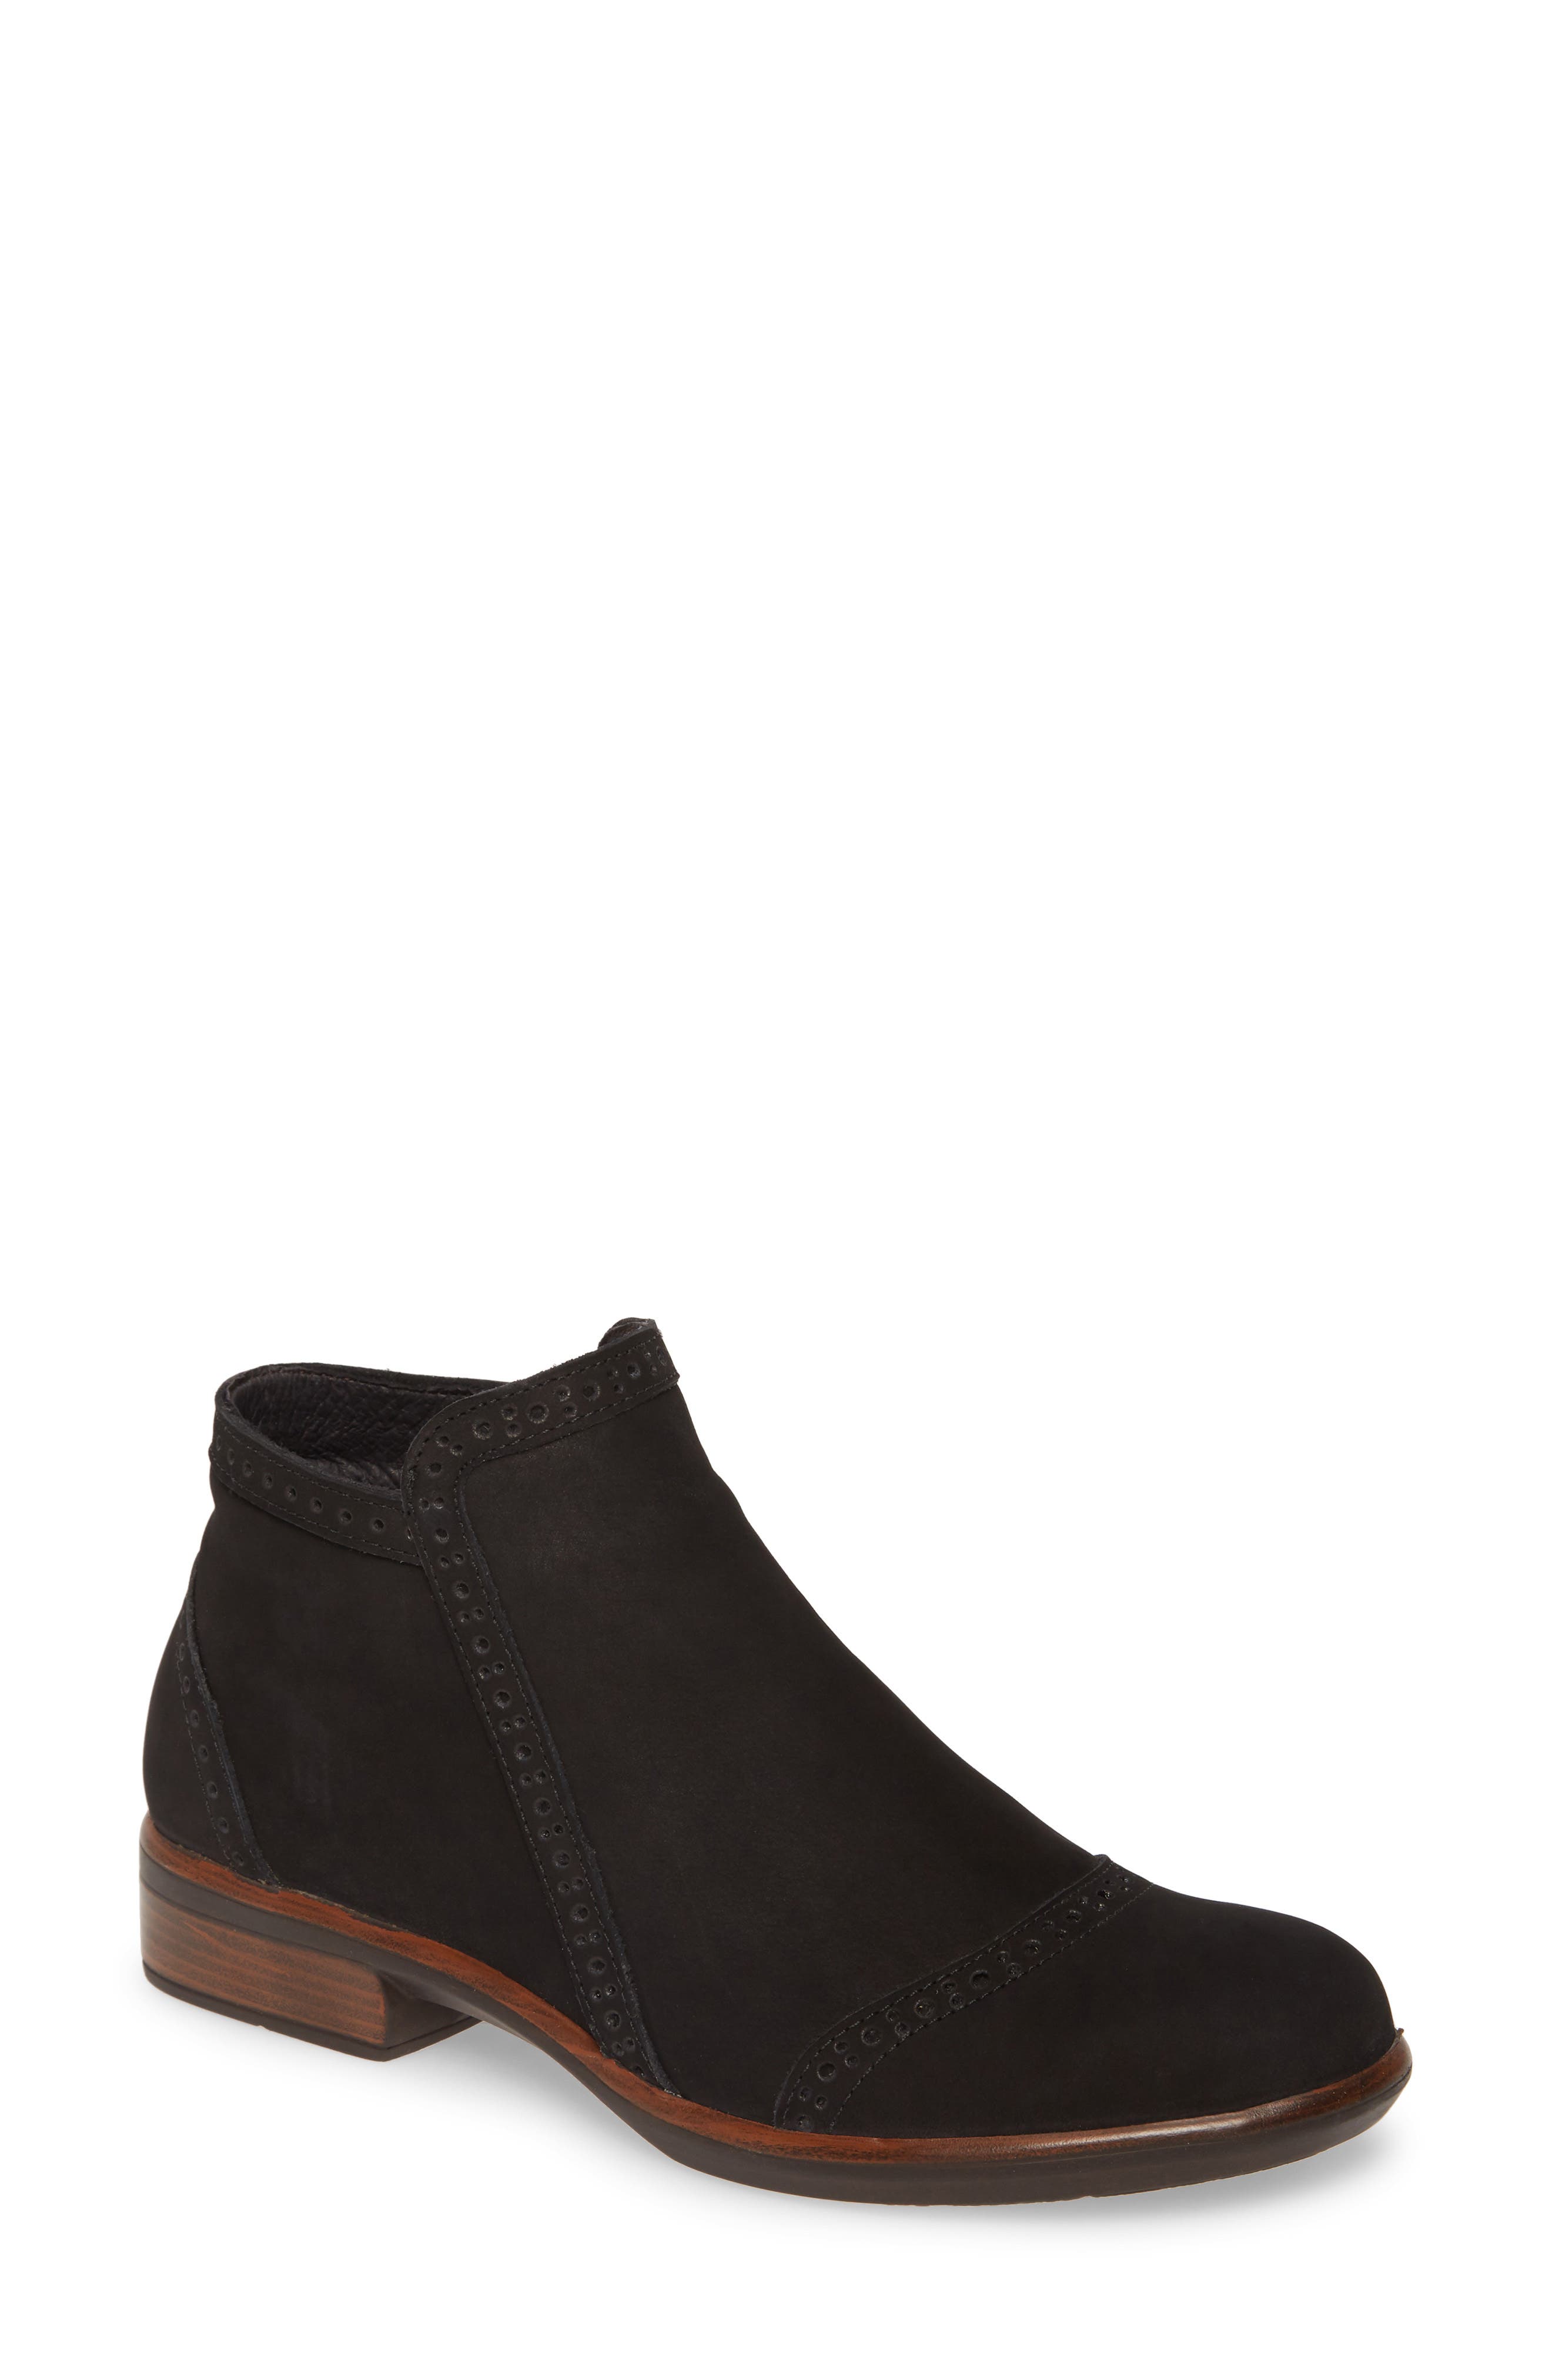 naot women's ankle boots